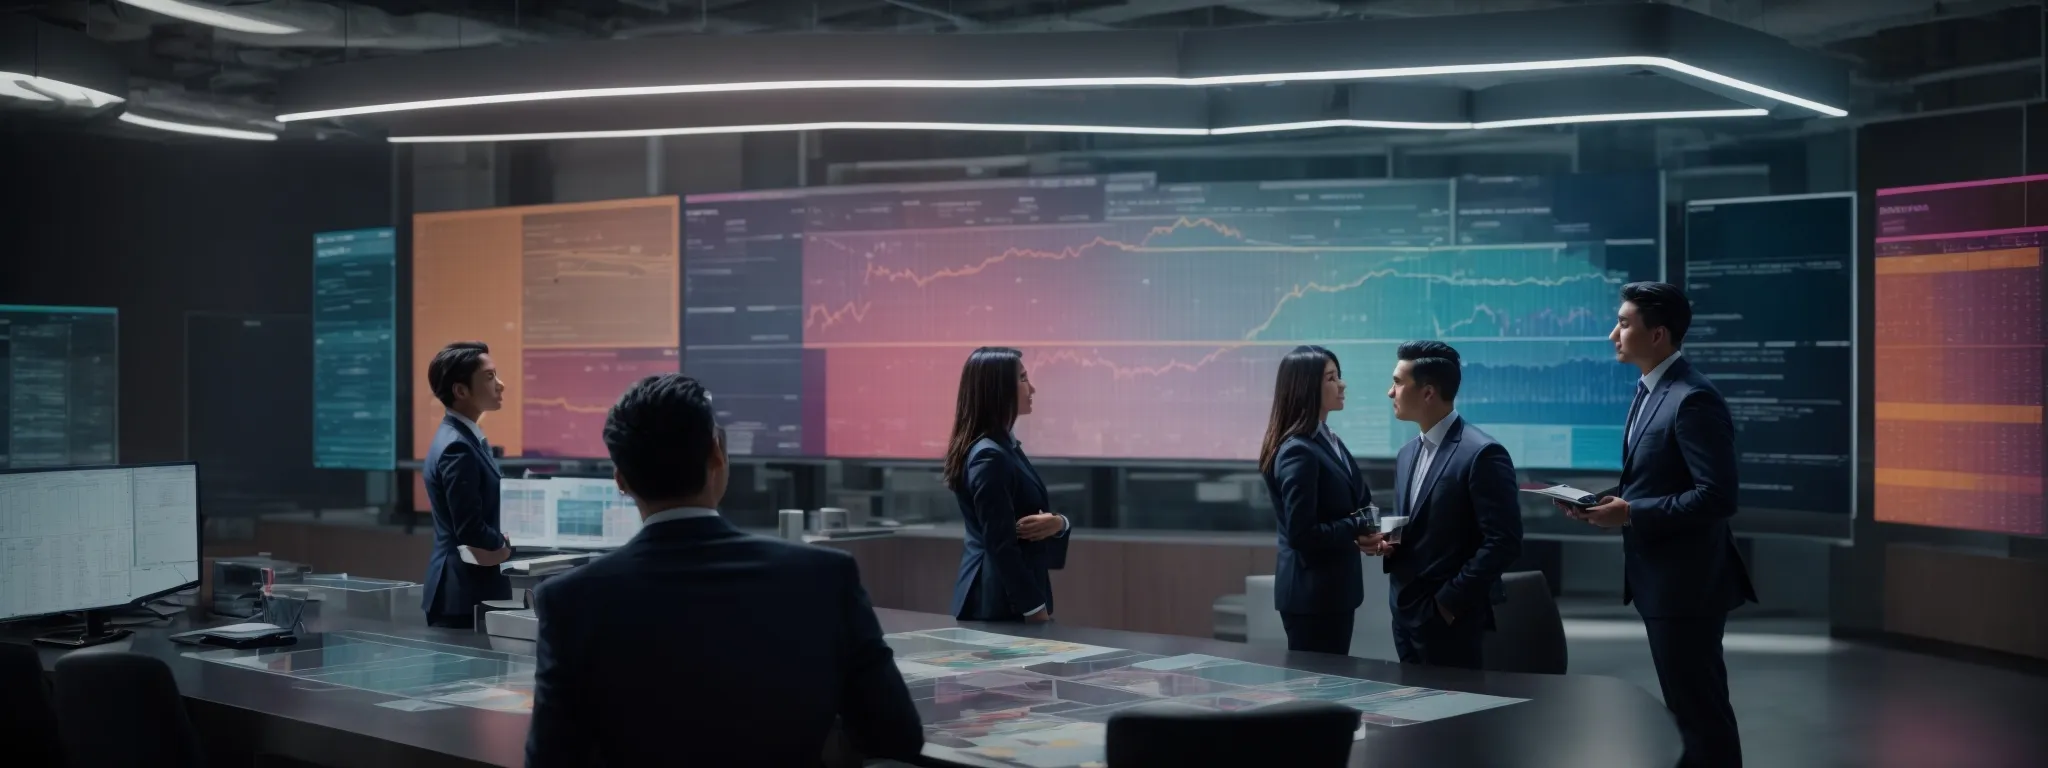 executives gather around a large digital screen displaying colorful flowcharts, strategizing over their business processes.